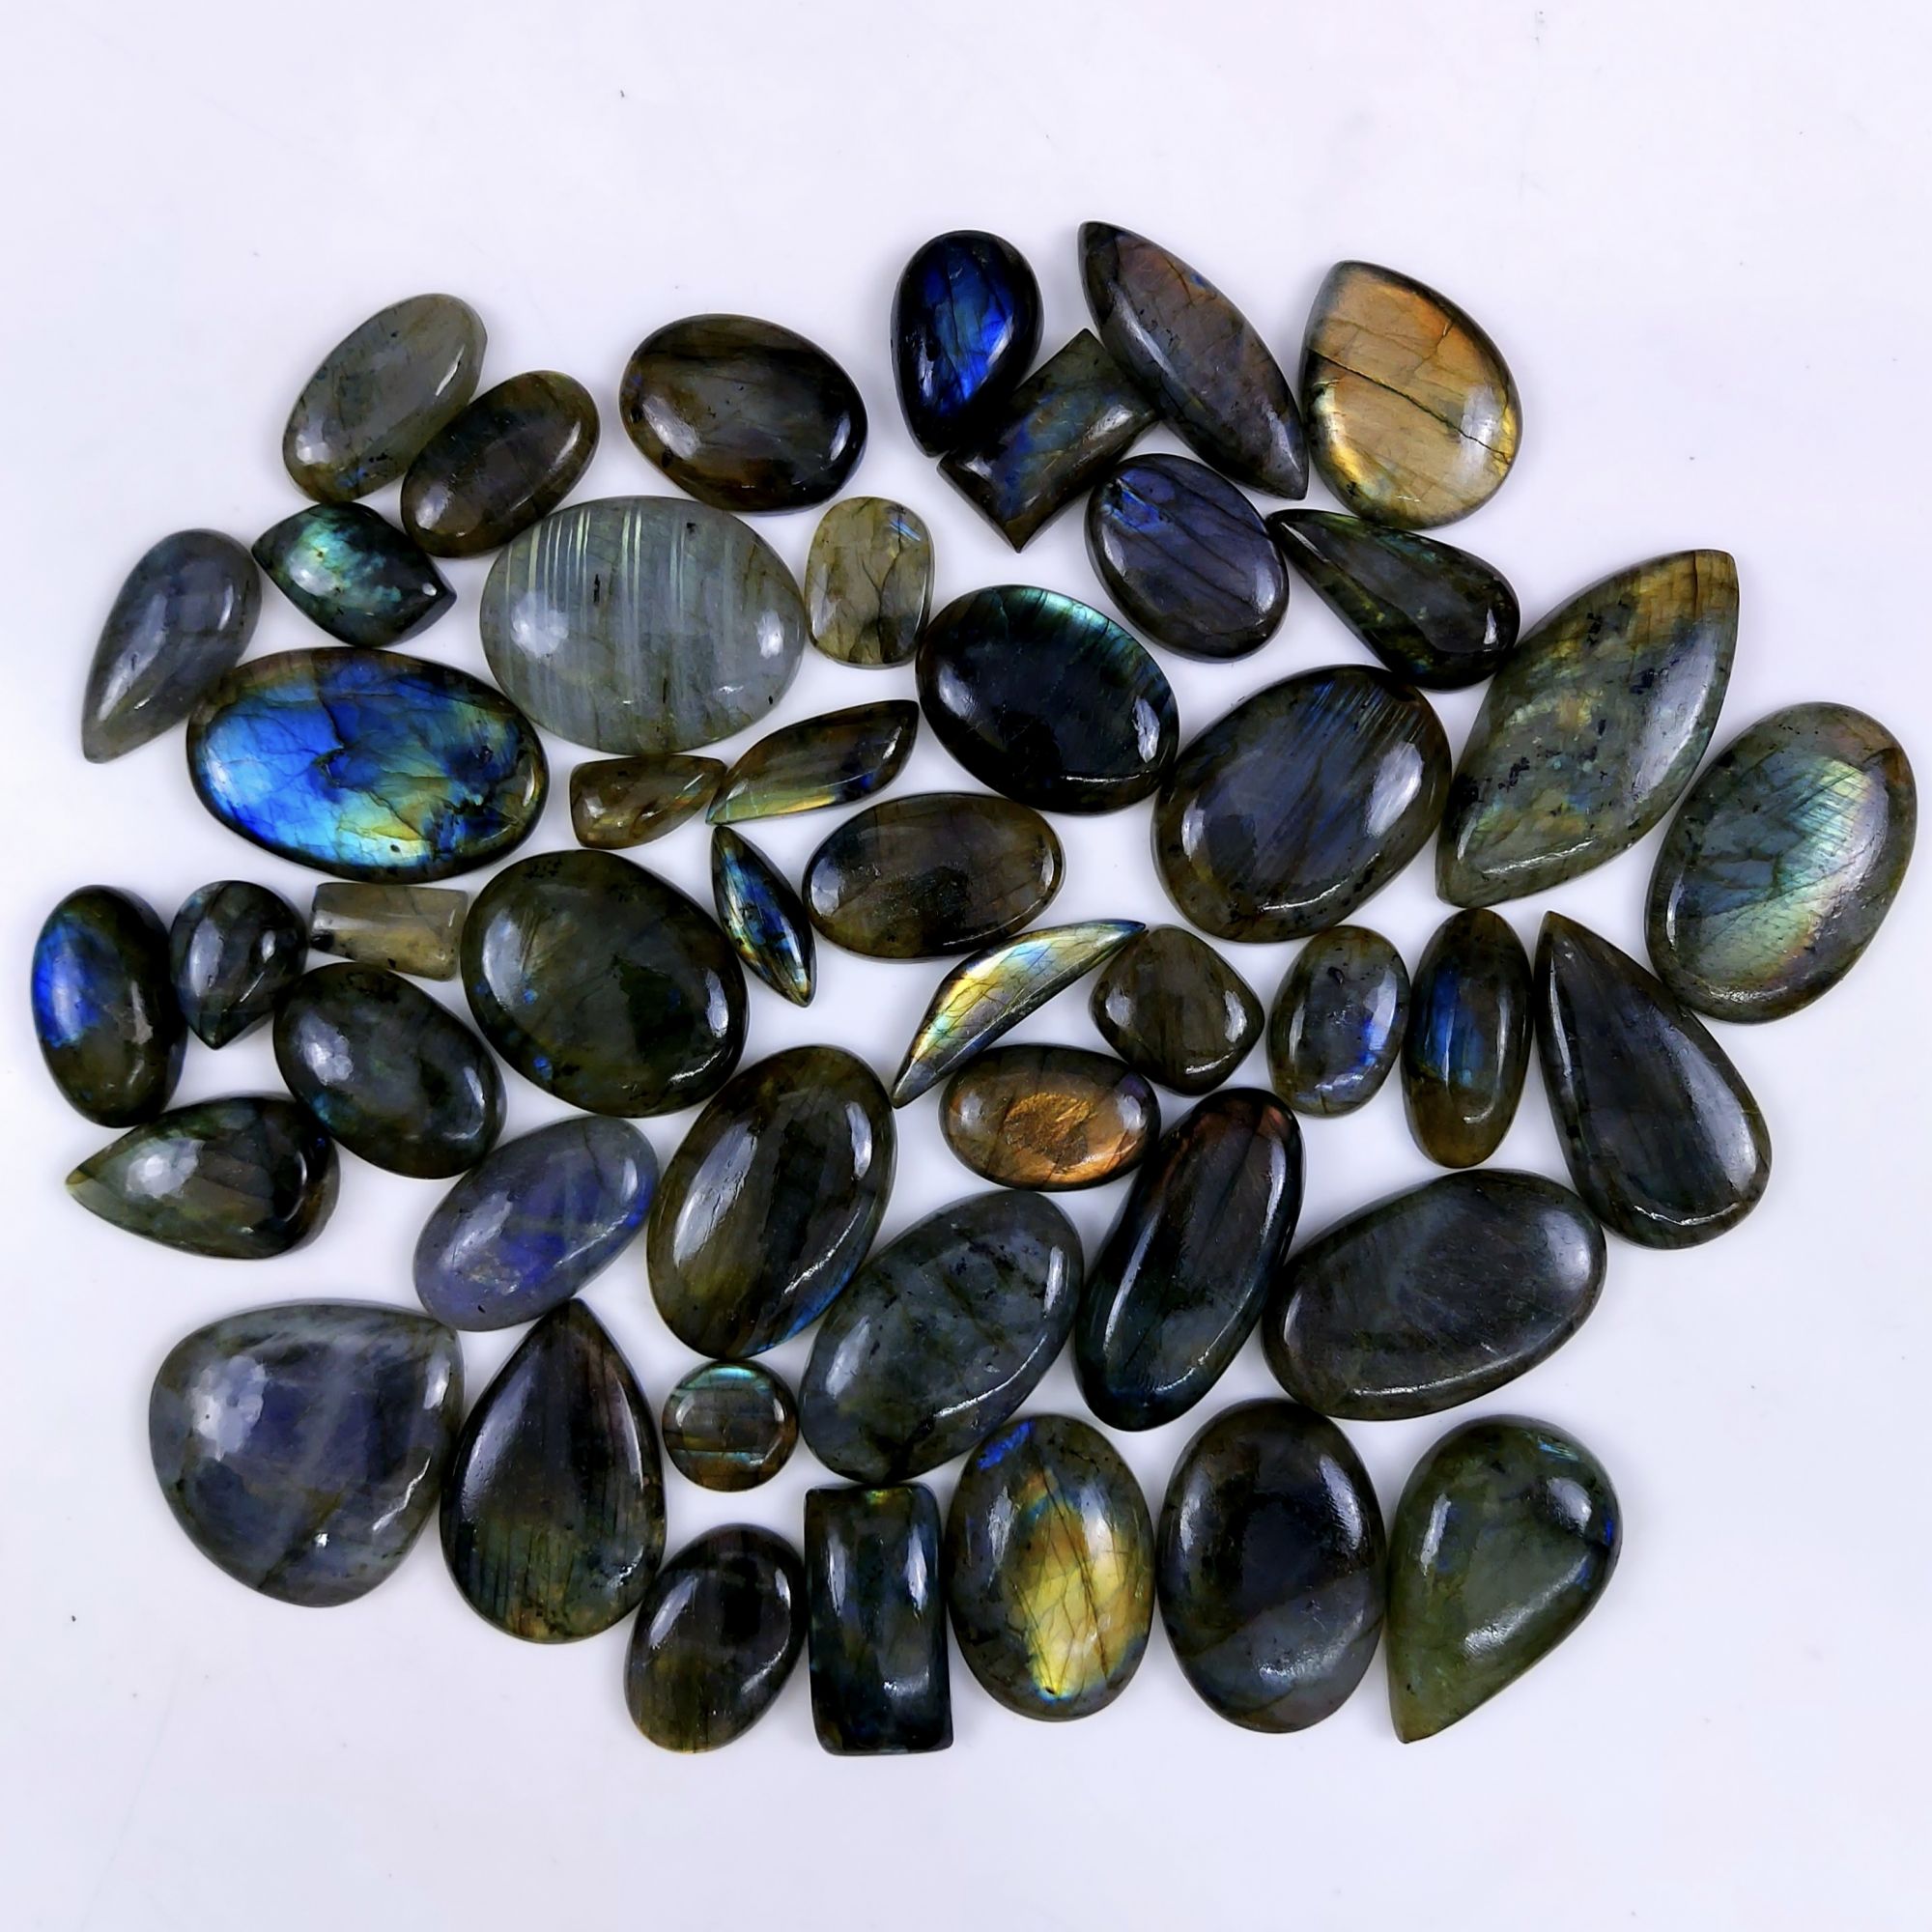 47pc 1676Cts Labradorite Cabochon Multifire Healing Crystal For Jewelry Supplies, Labradorite Necklace Handmade Wire Wrapped Gemstone Pendant 39x36 18x10mm#6341